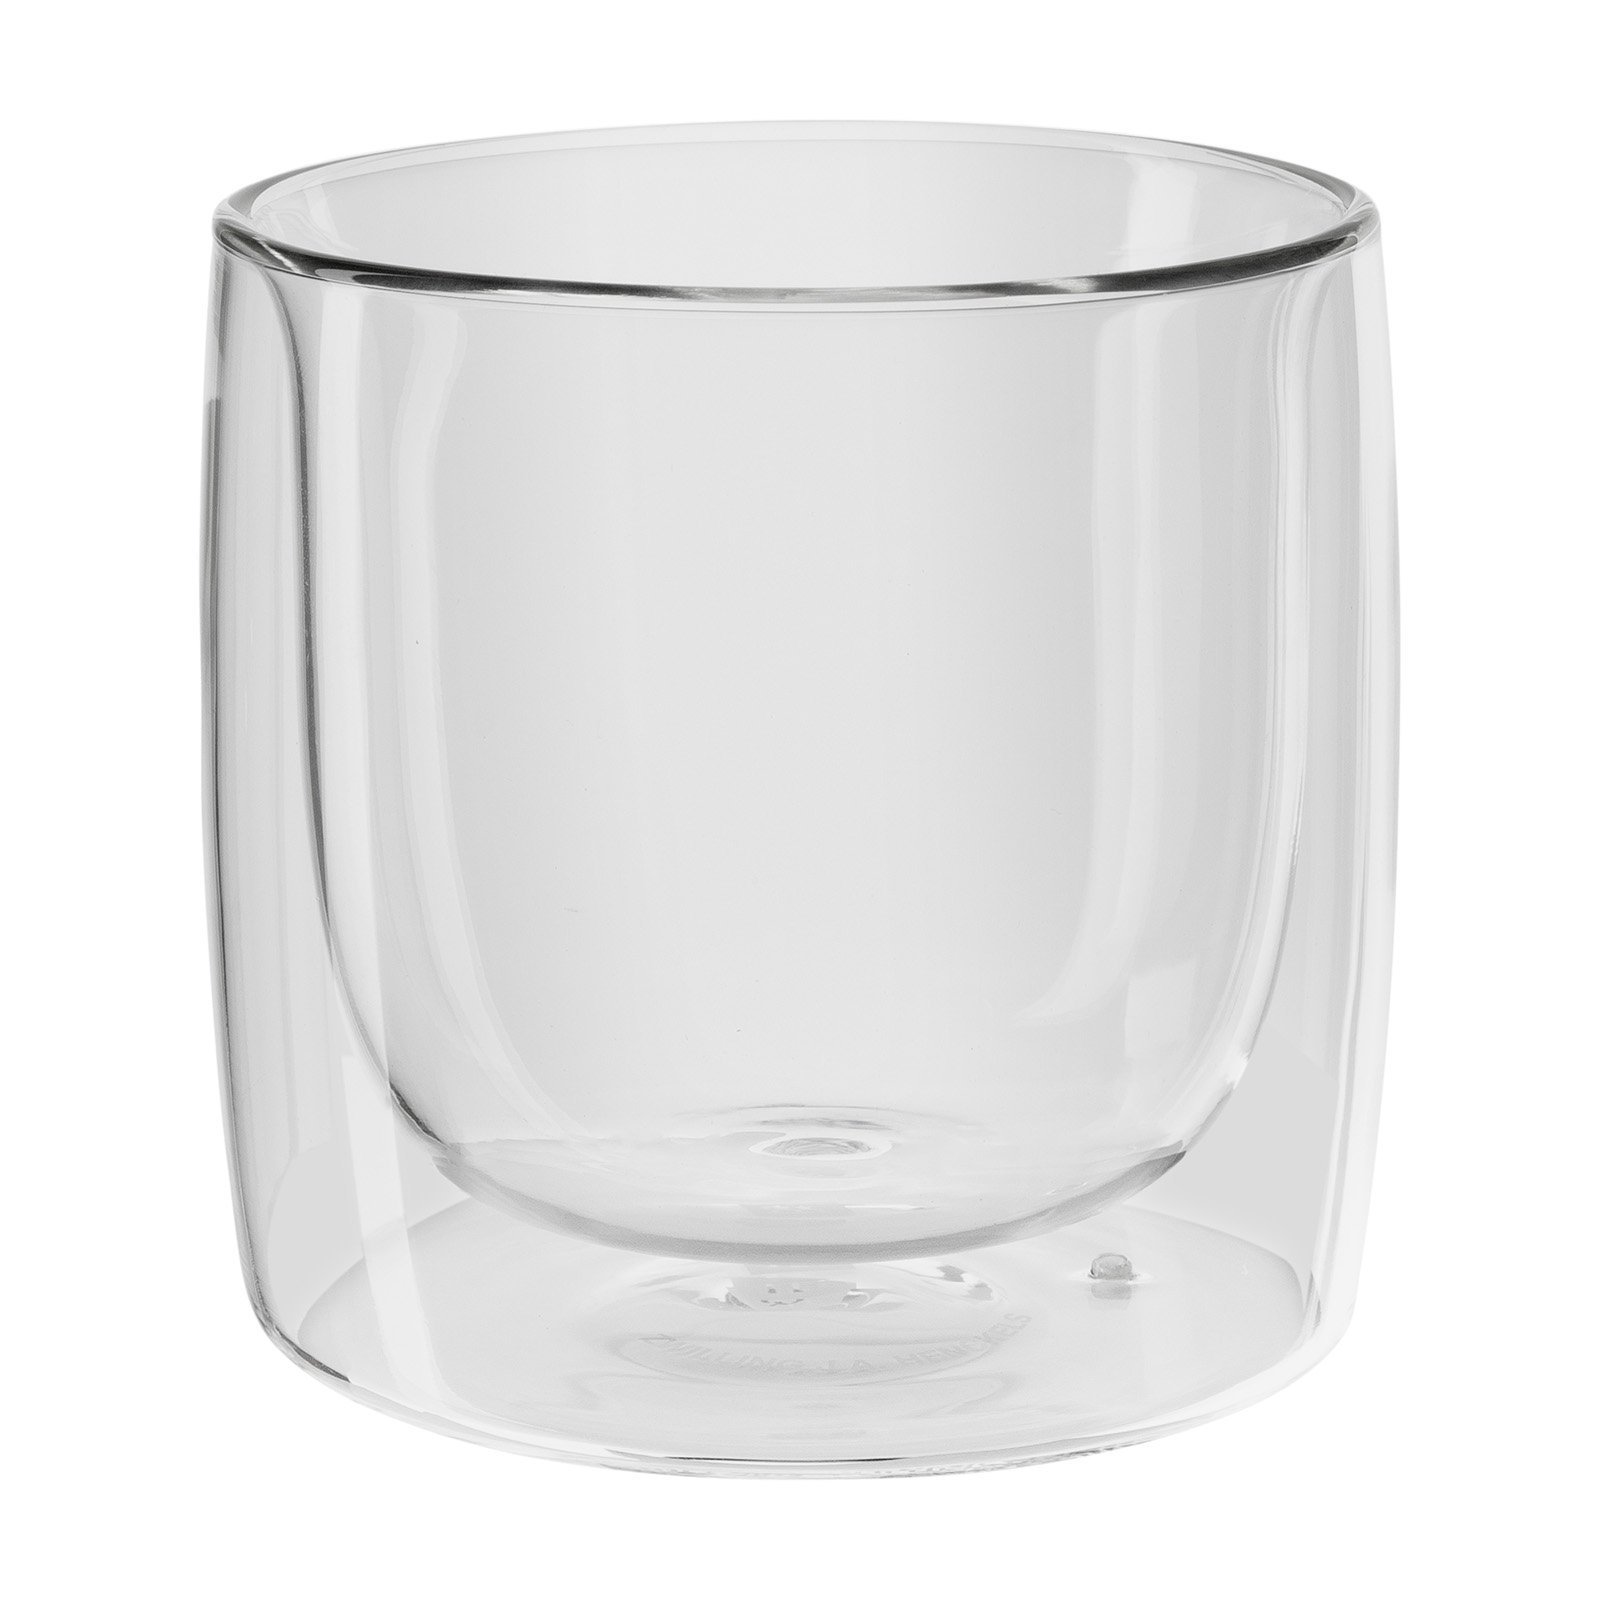 M&N Home Double Walled Drinking Glass - 13.5 oz Tumbler, Clear